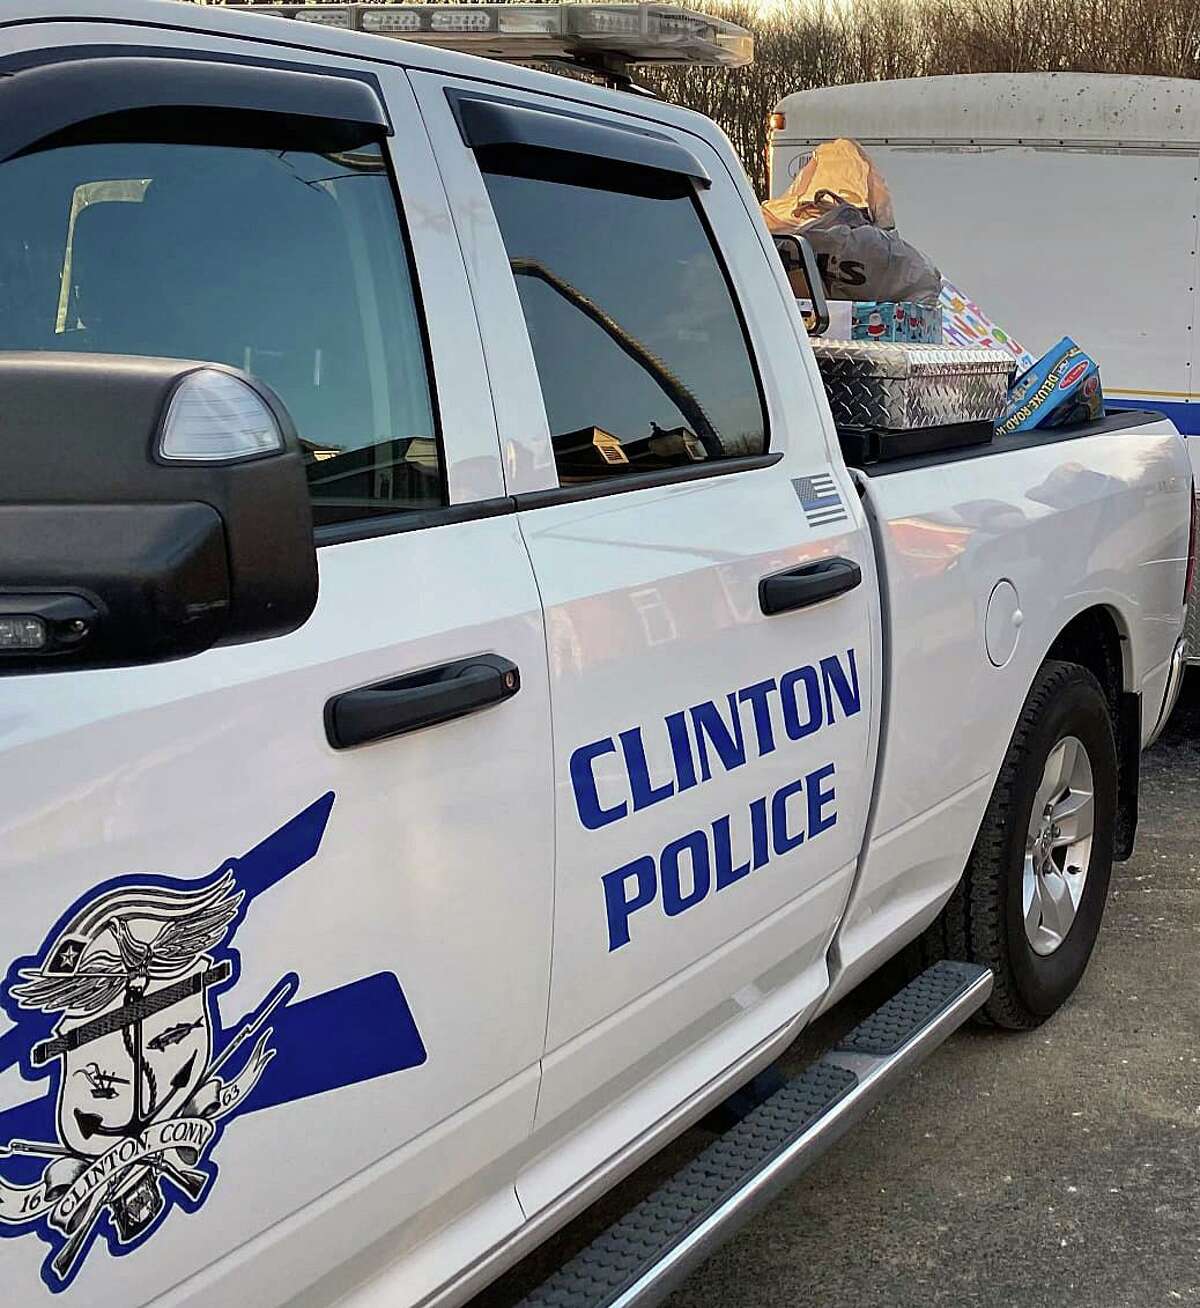 A vehicle was stolen from the Clinton Crossing Premium Outlets in Clinton, Conn., last week, according to police.